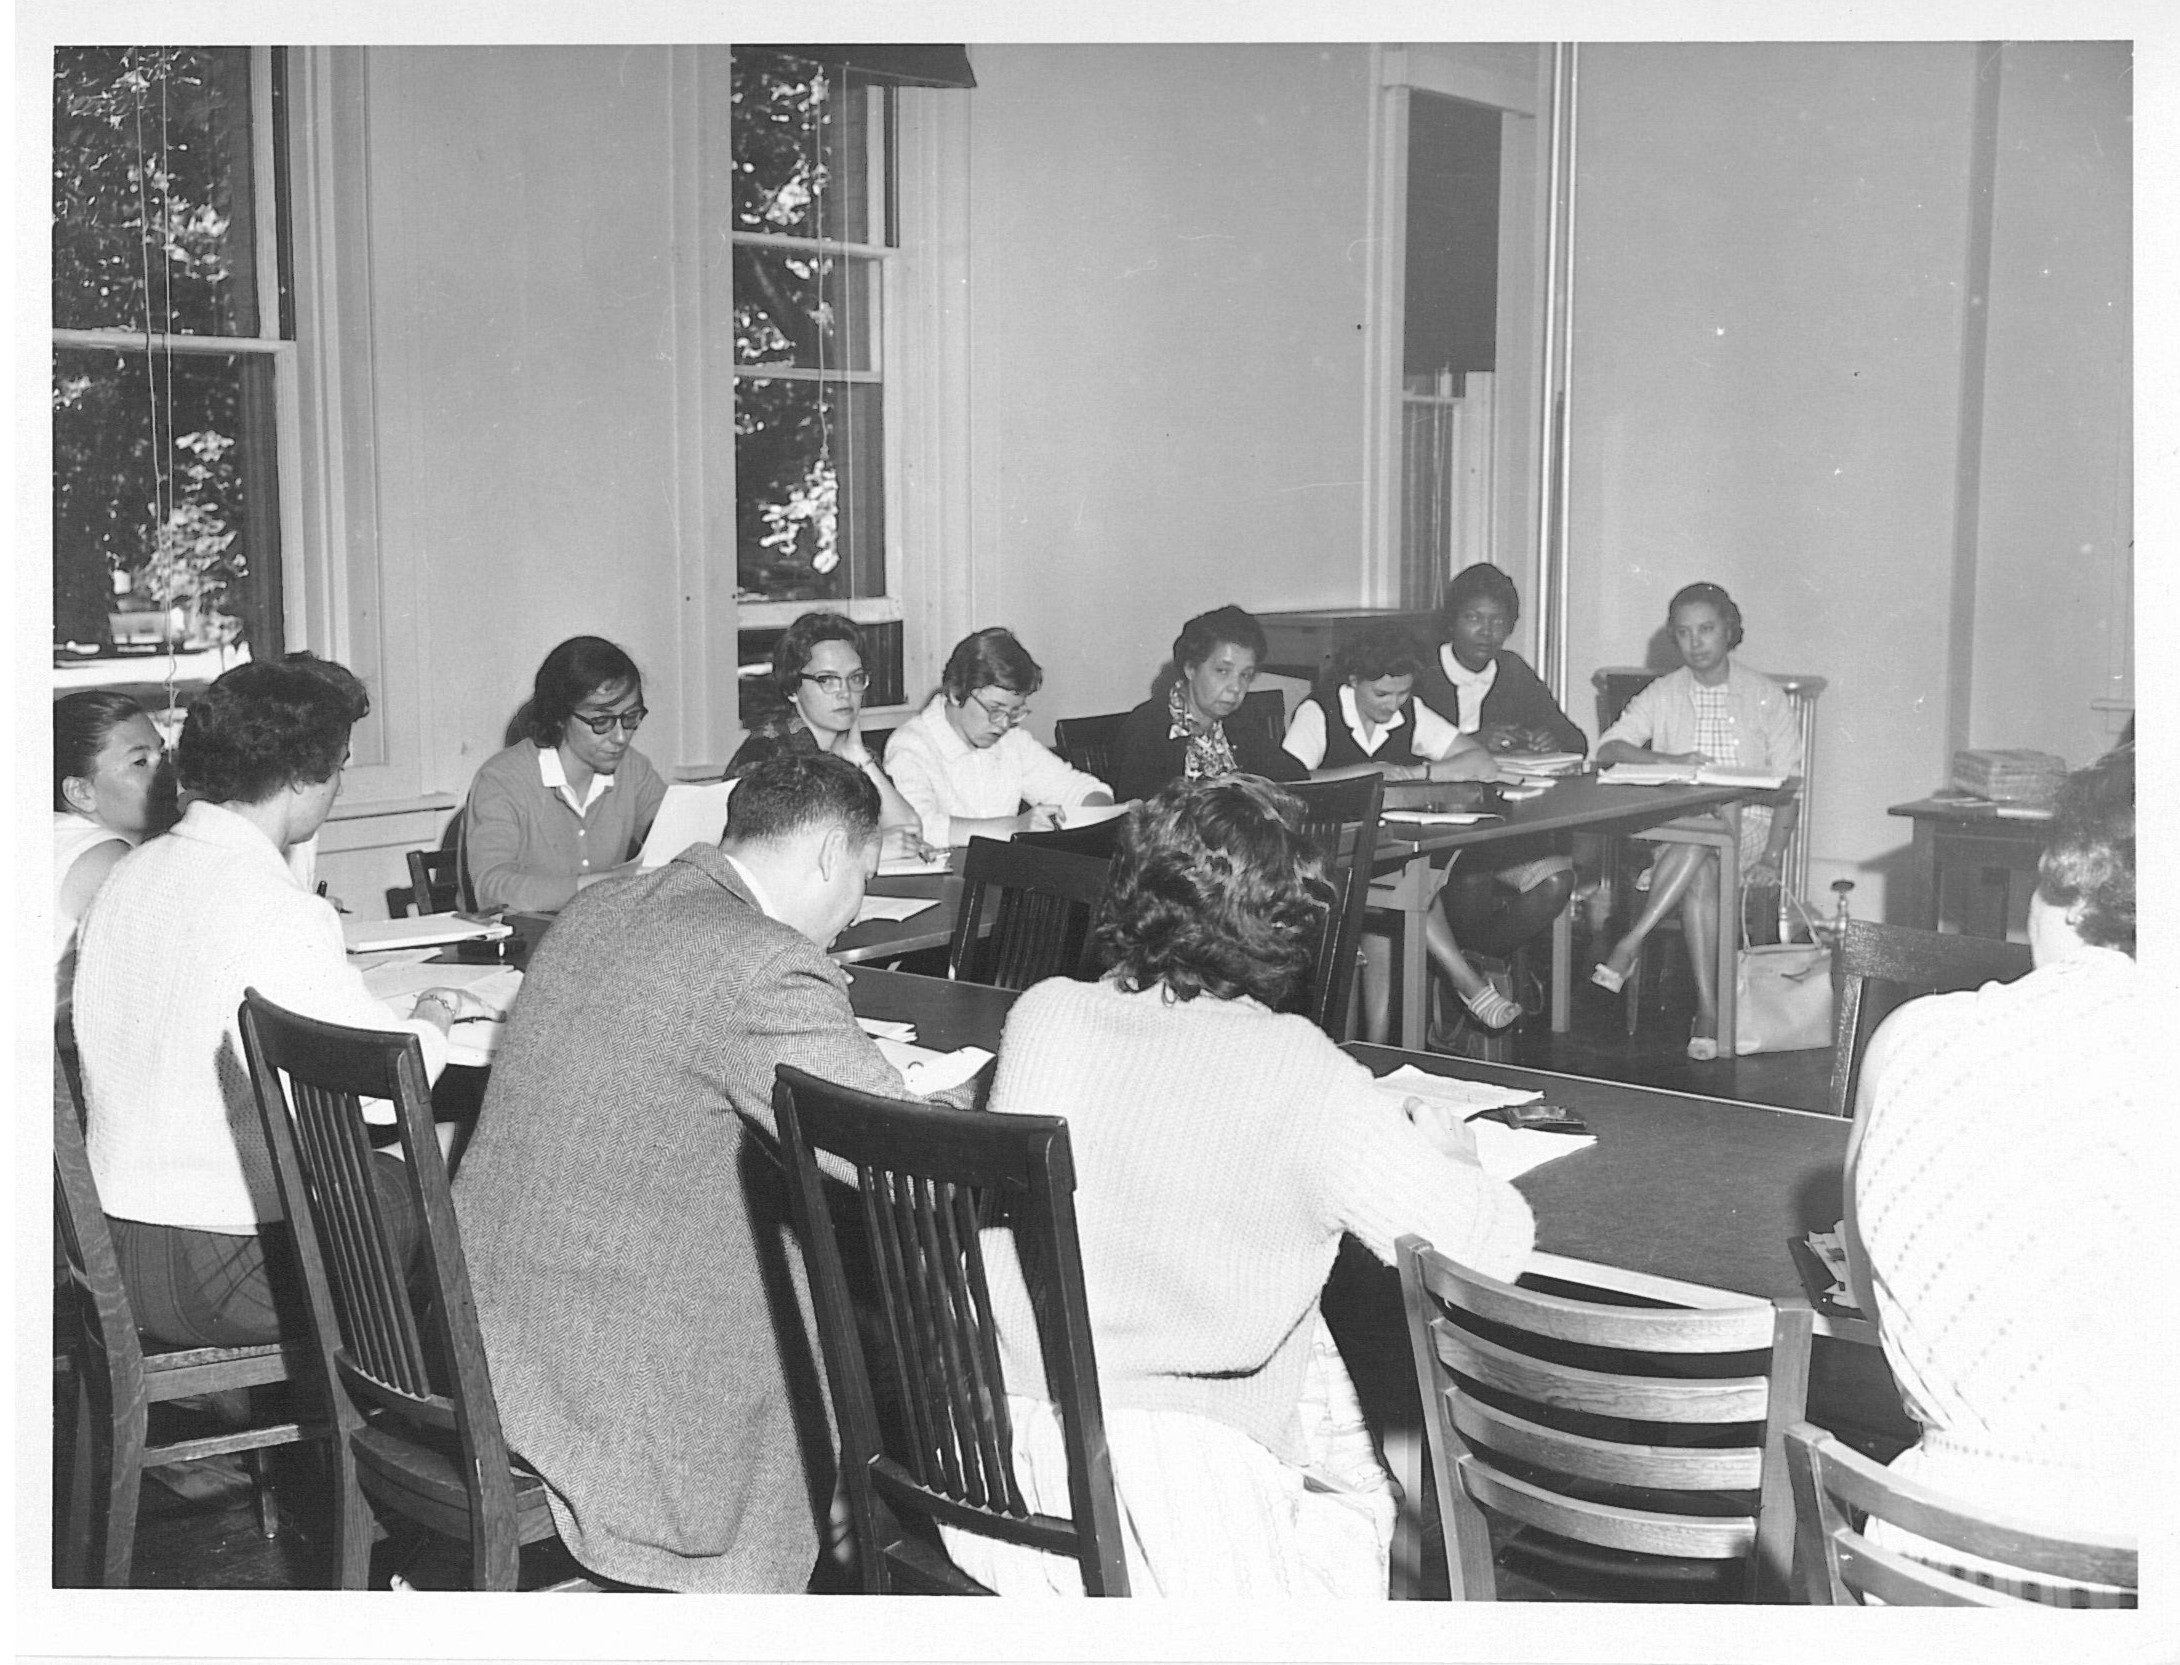 Black and white photo of people at an L shaped table in suits and dresses.